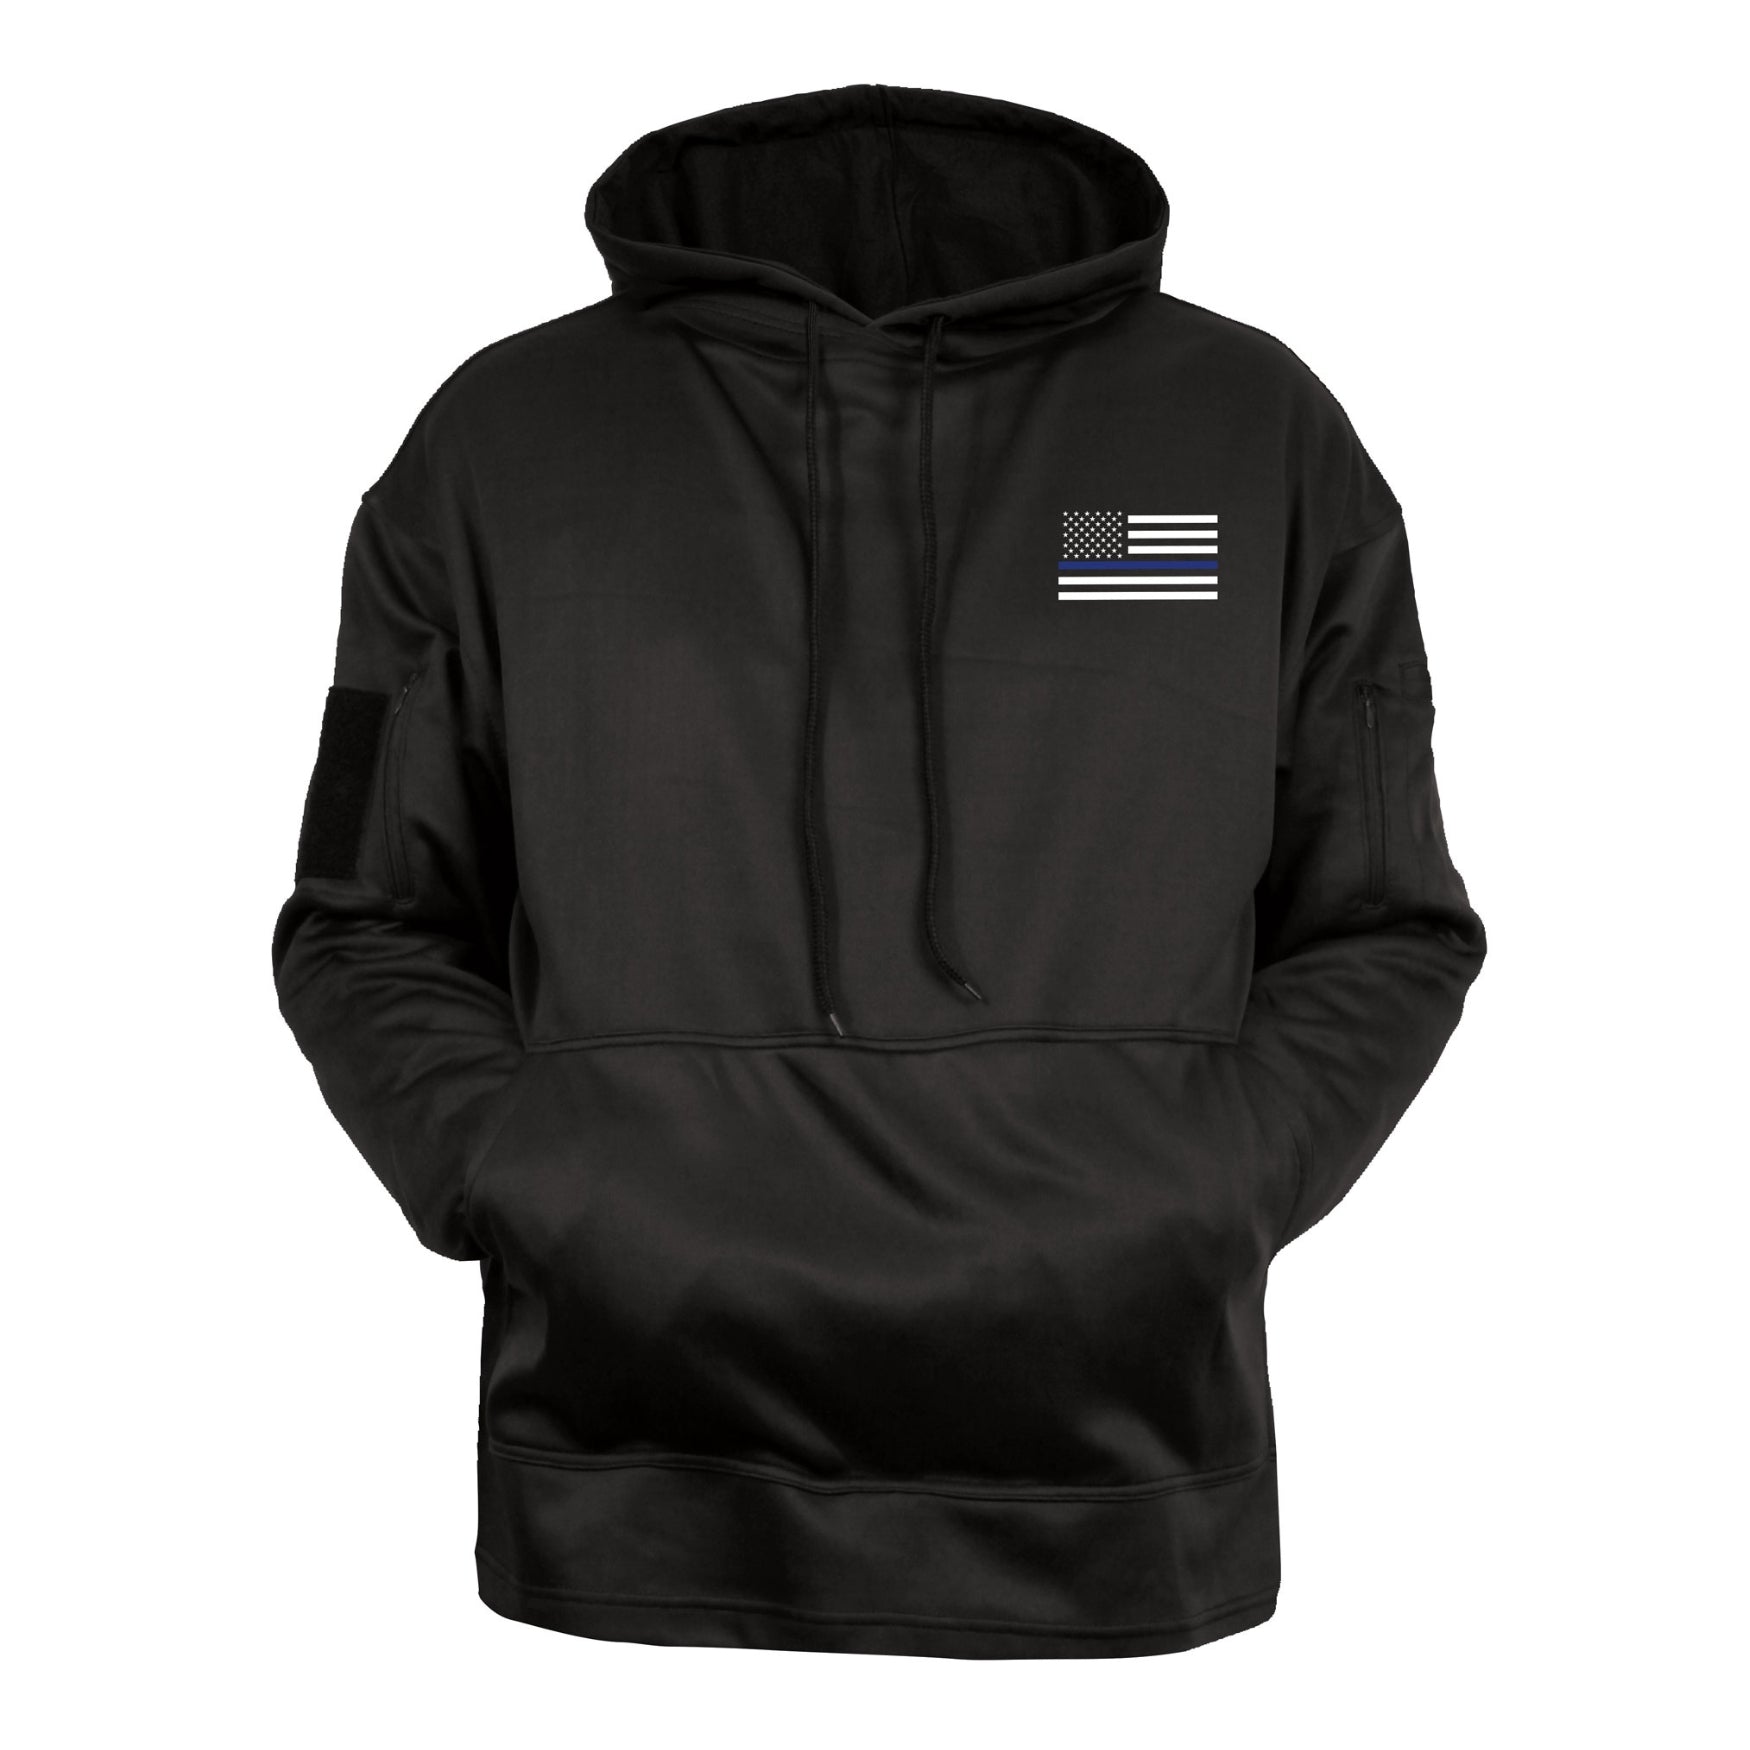 Rothco Honor and Respect Thin Blue Line Concealed Carry Hoodie - Black - 1